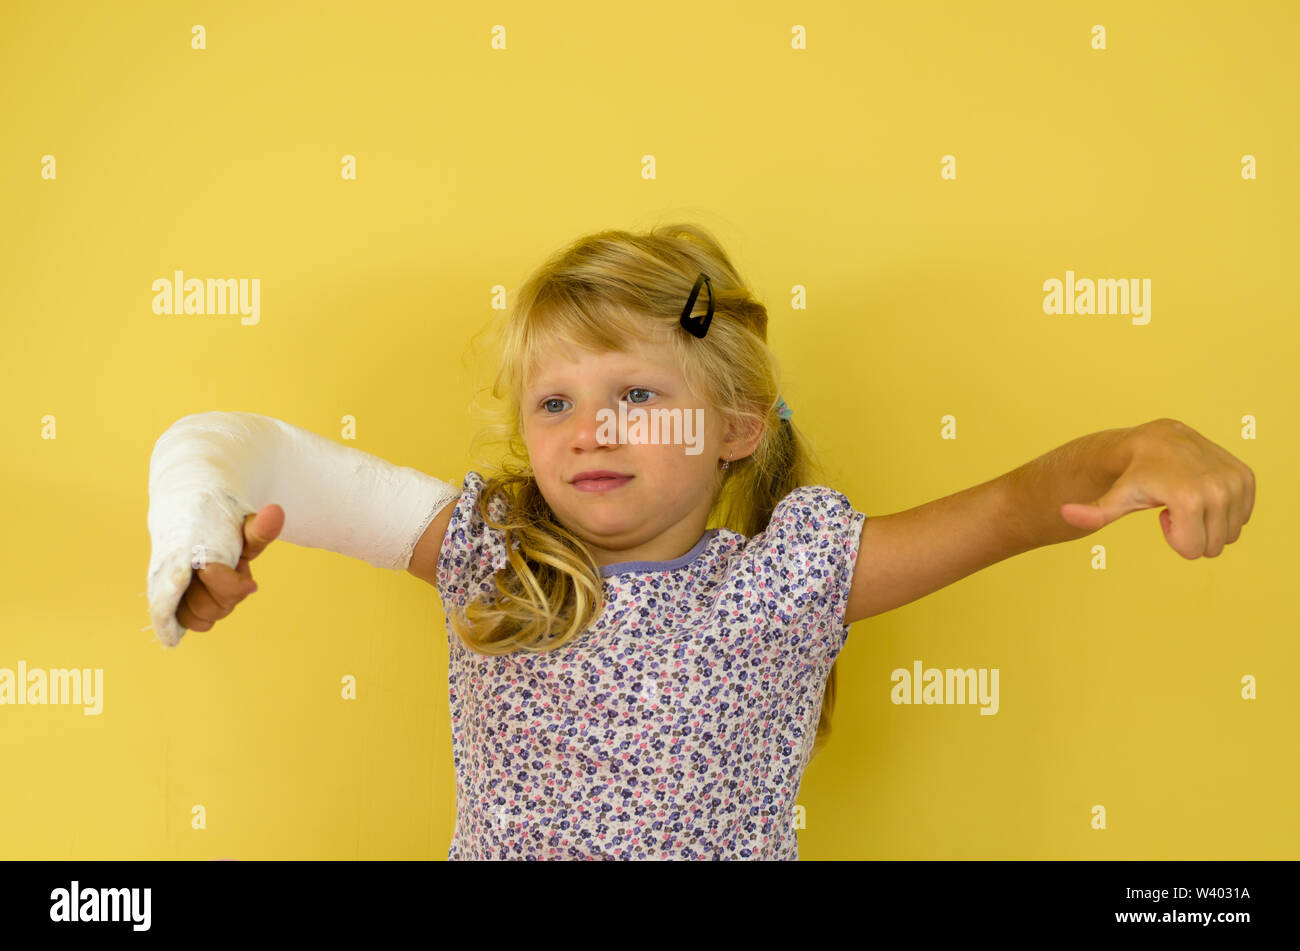 hurt blond girl with broken hand doing sport gesture of strength and triumph Stock Photo